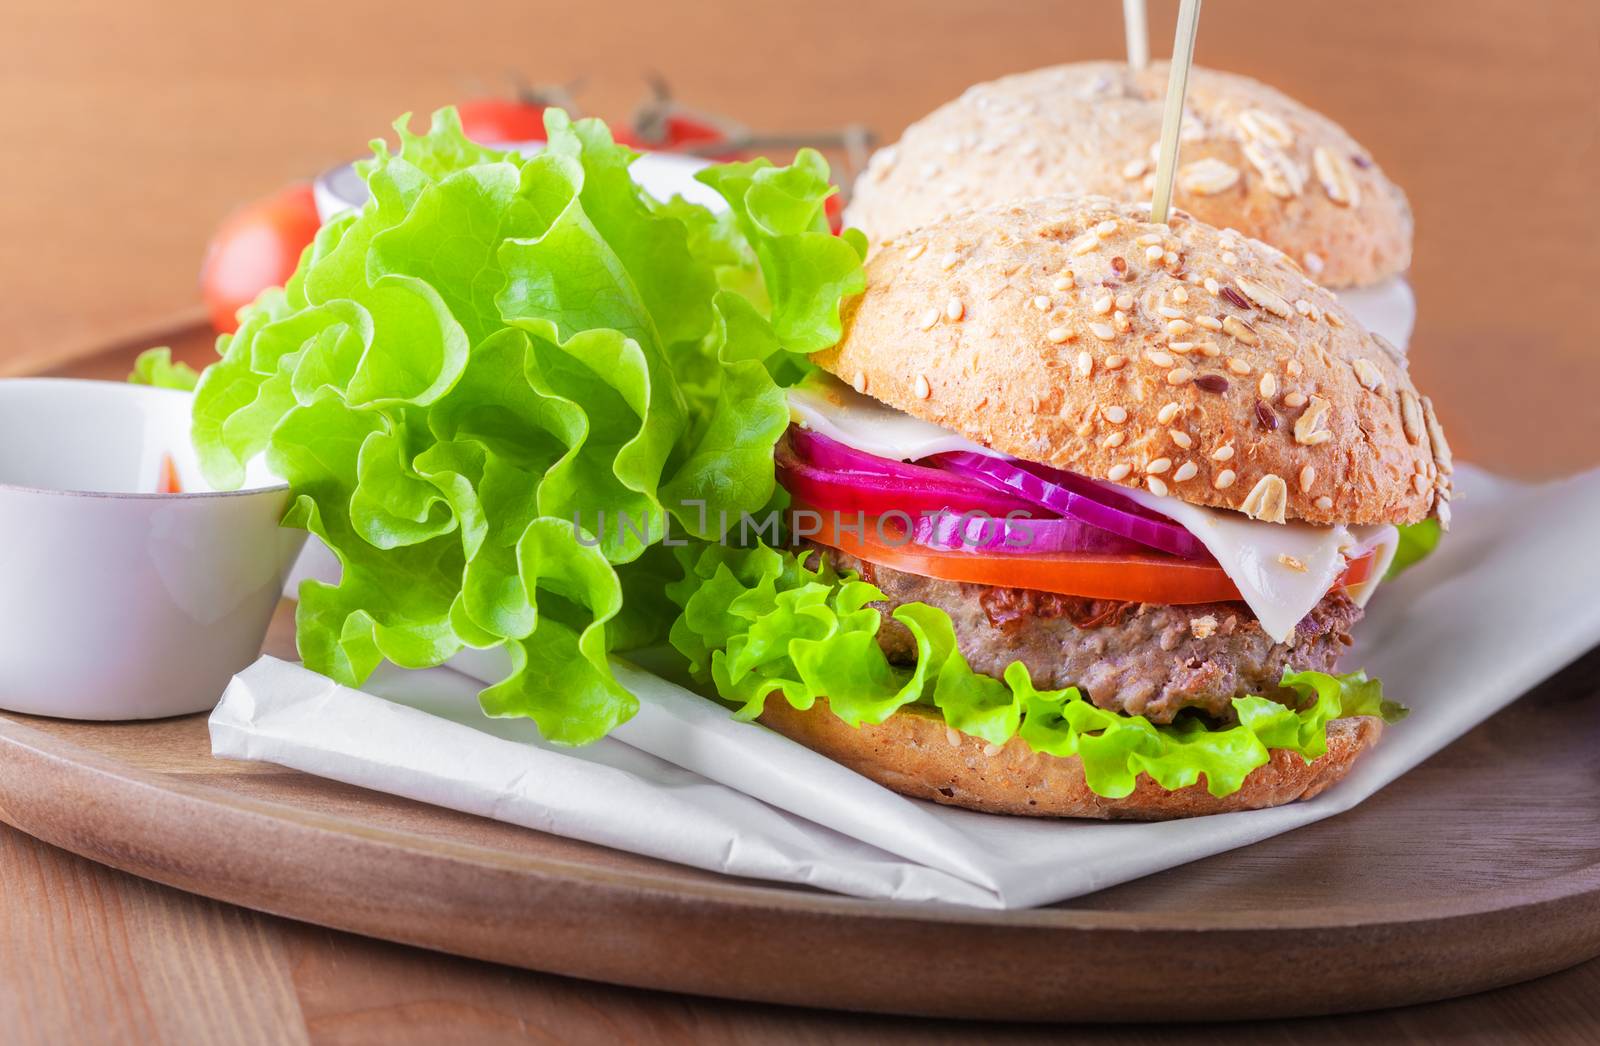 Cheeseburger with salad, onion tomato and fresh bread